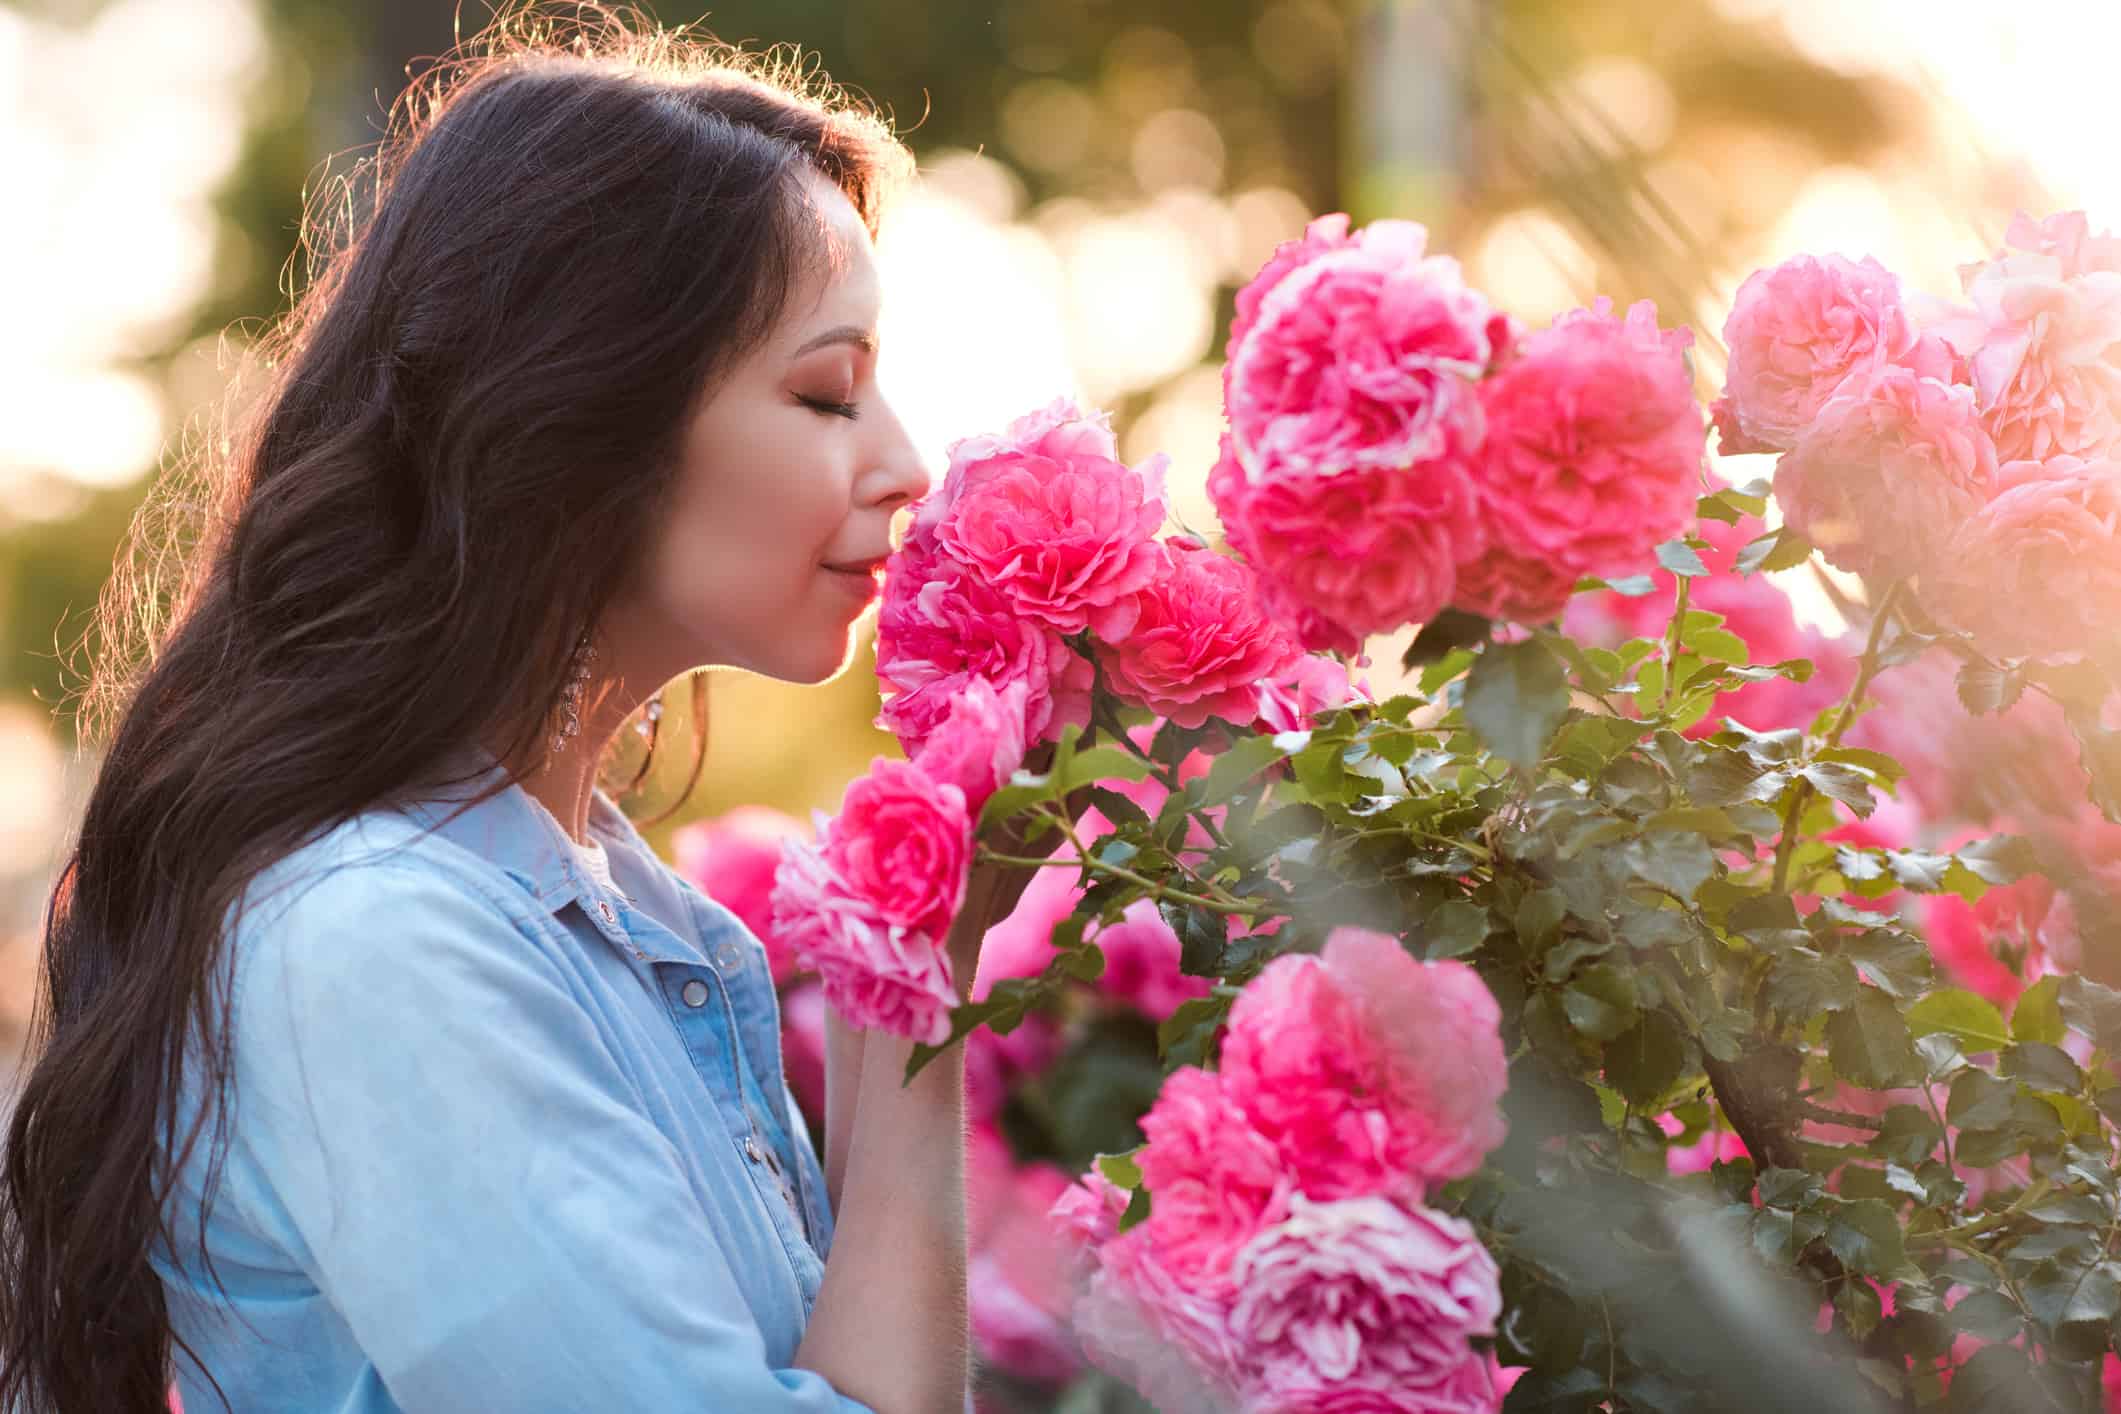 Smelling pink roses in the garden.